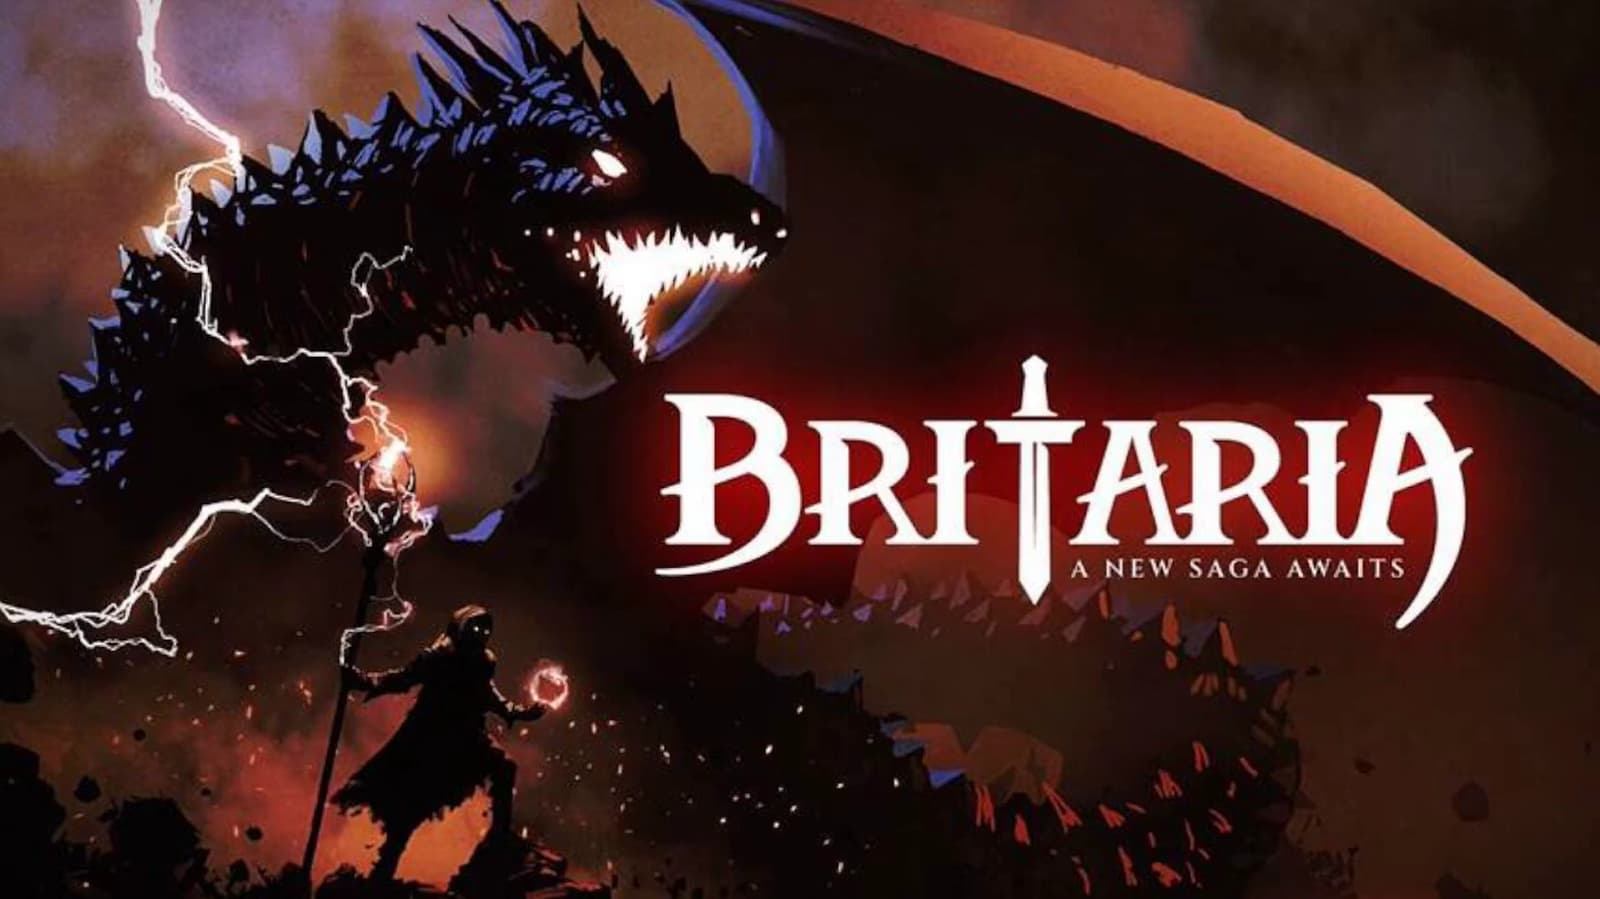 Dramatic artwork for "BRITARIA" featuring a dragon and a mage